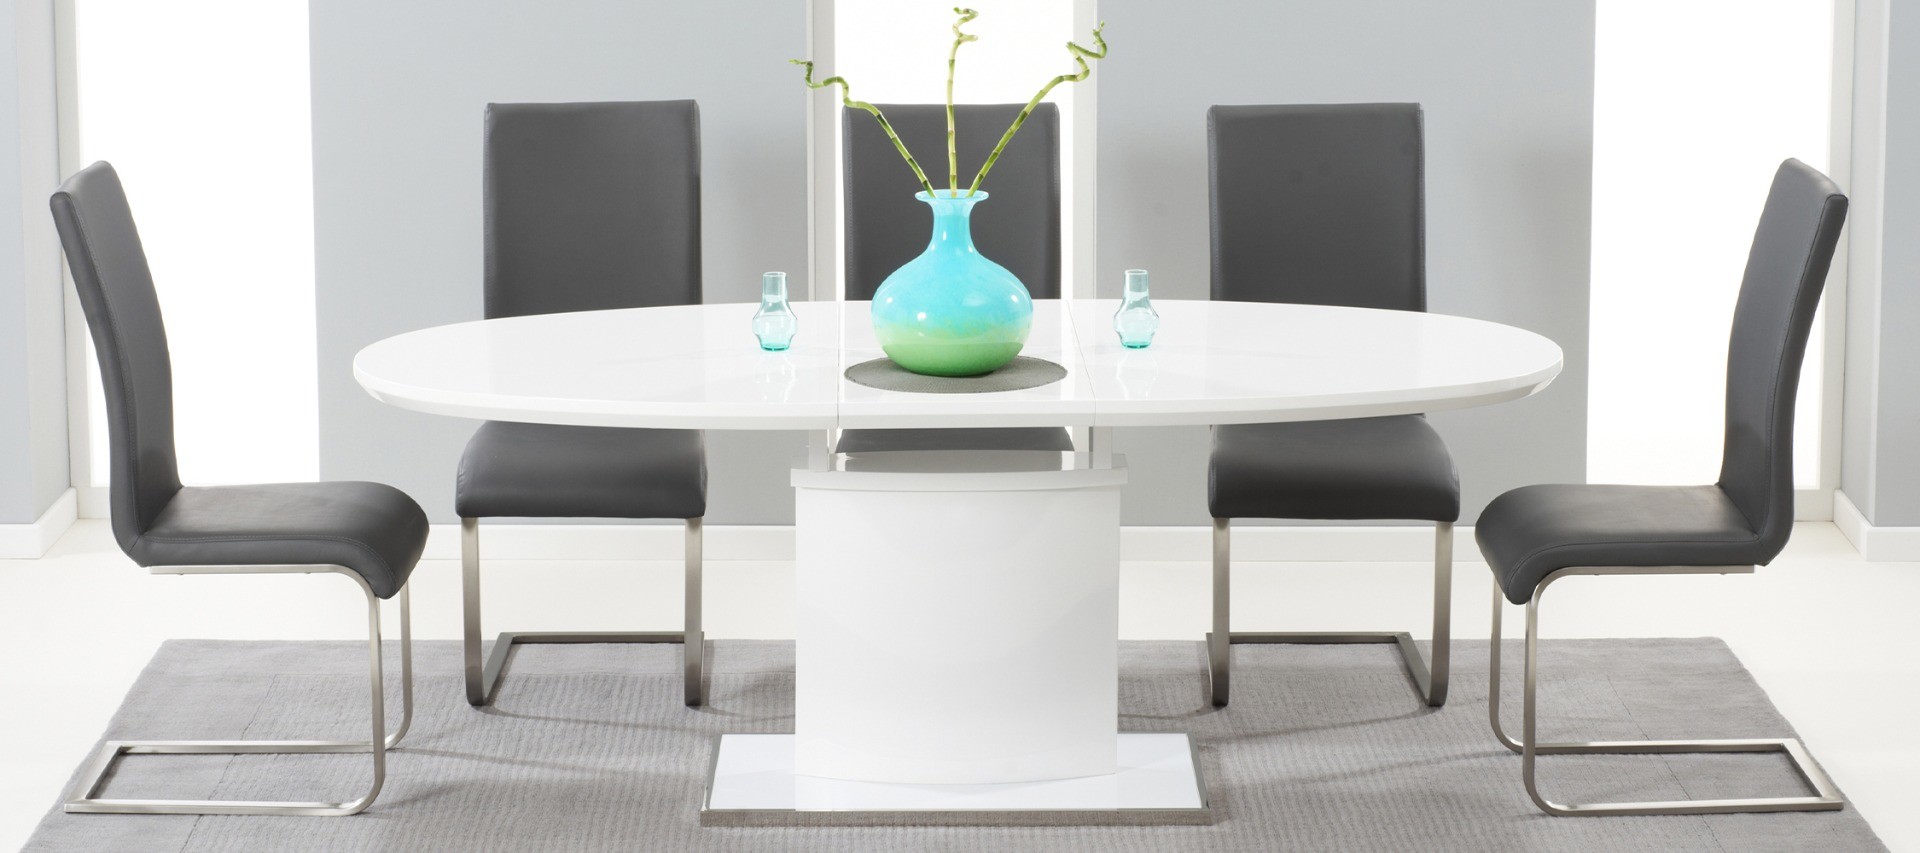 Photo 1 of Extending valzo 160cm white high gloss pedestal dining table with 6 black austin chairs